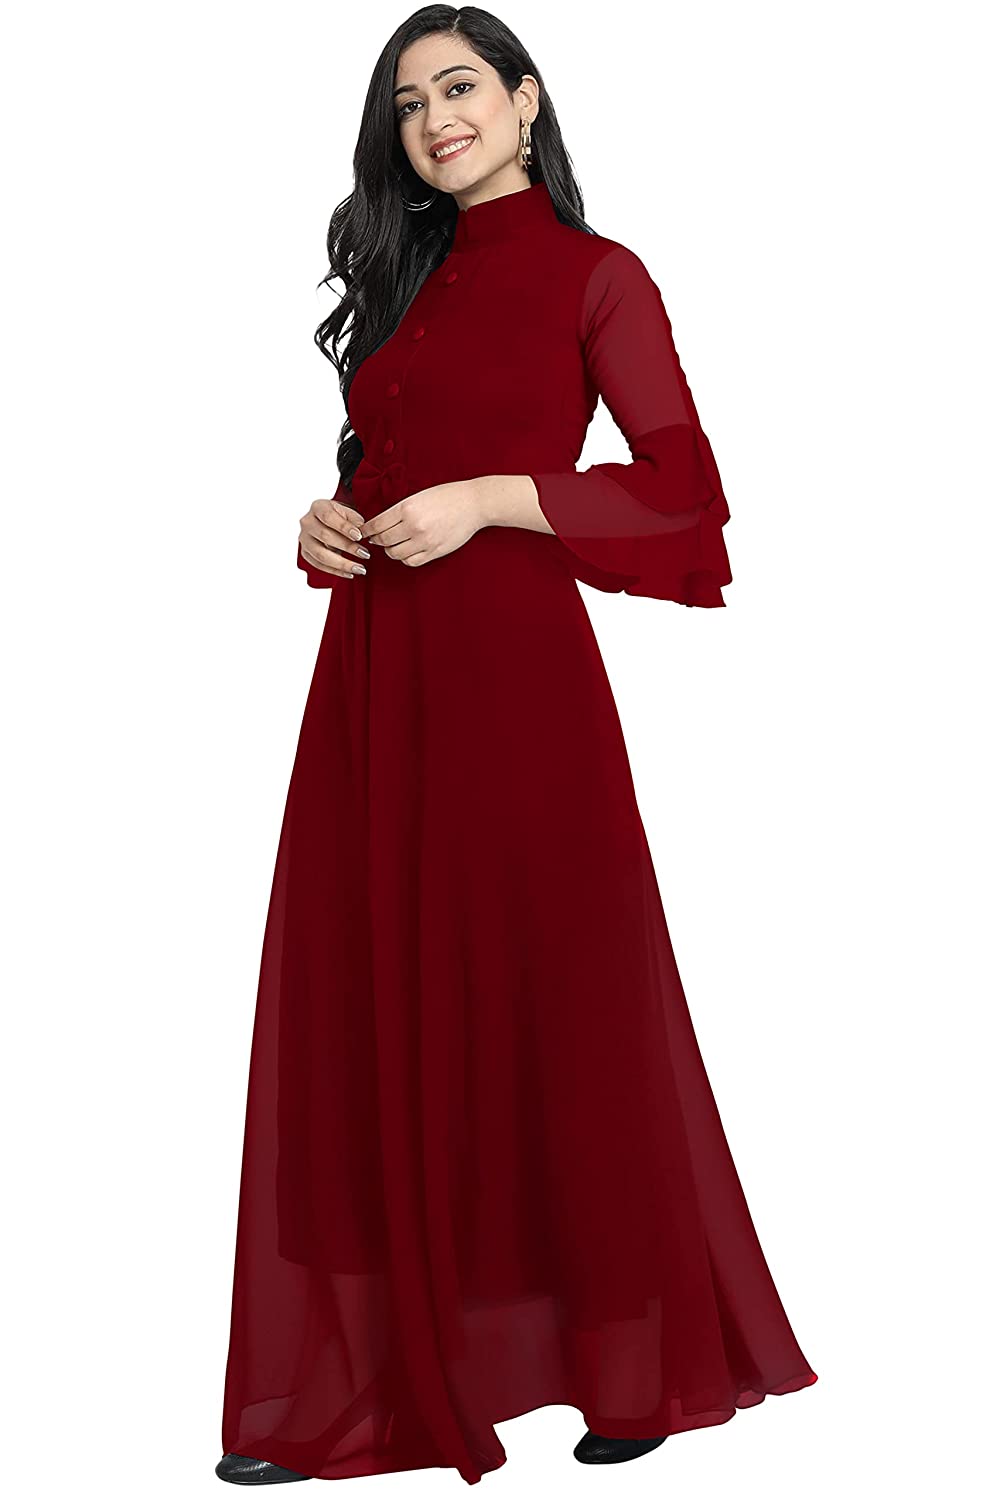 FIBREZA Women's Georgette Traditional A Line Western Long Dress with Collar Neck Flare Sleeve Pattern -  Dresses in Sri Lanka from Arcade Online Shopping - Just Rs. 6299!